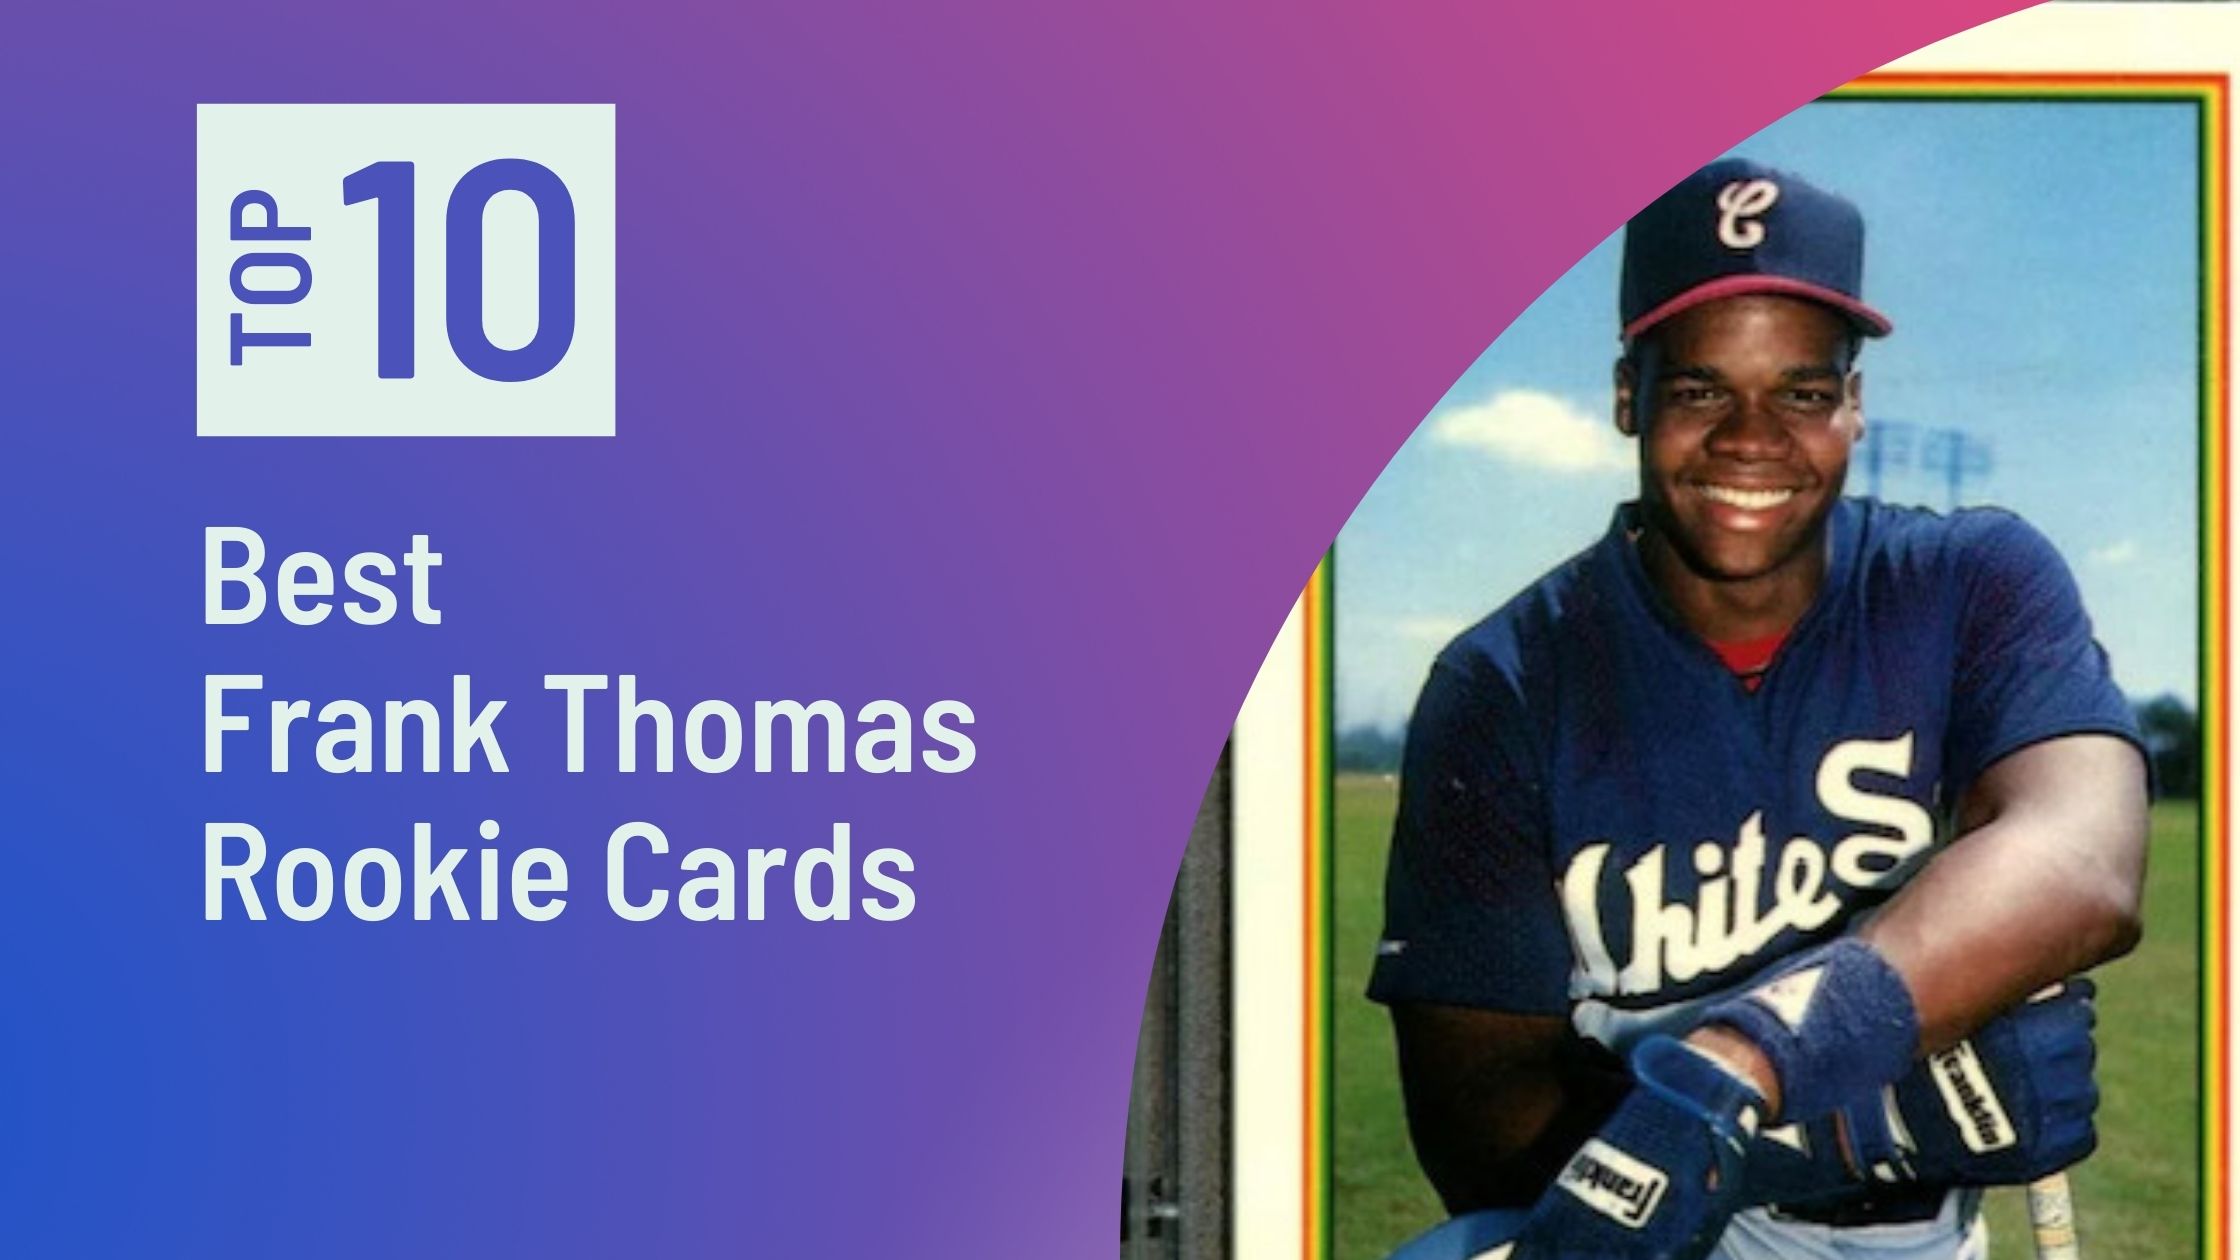 Featured image for the Best Frank Thomas Rookie Cards blog post on Sports Card Sharks